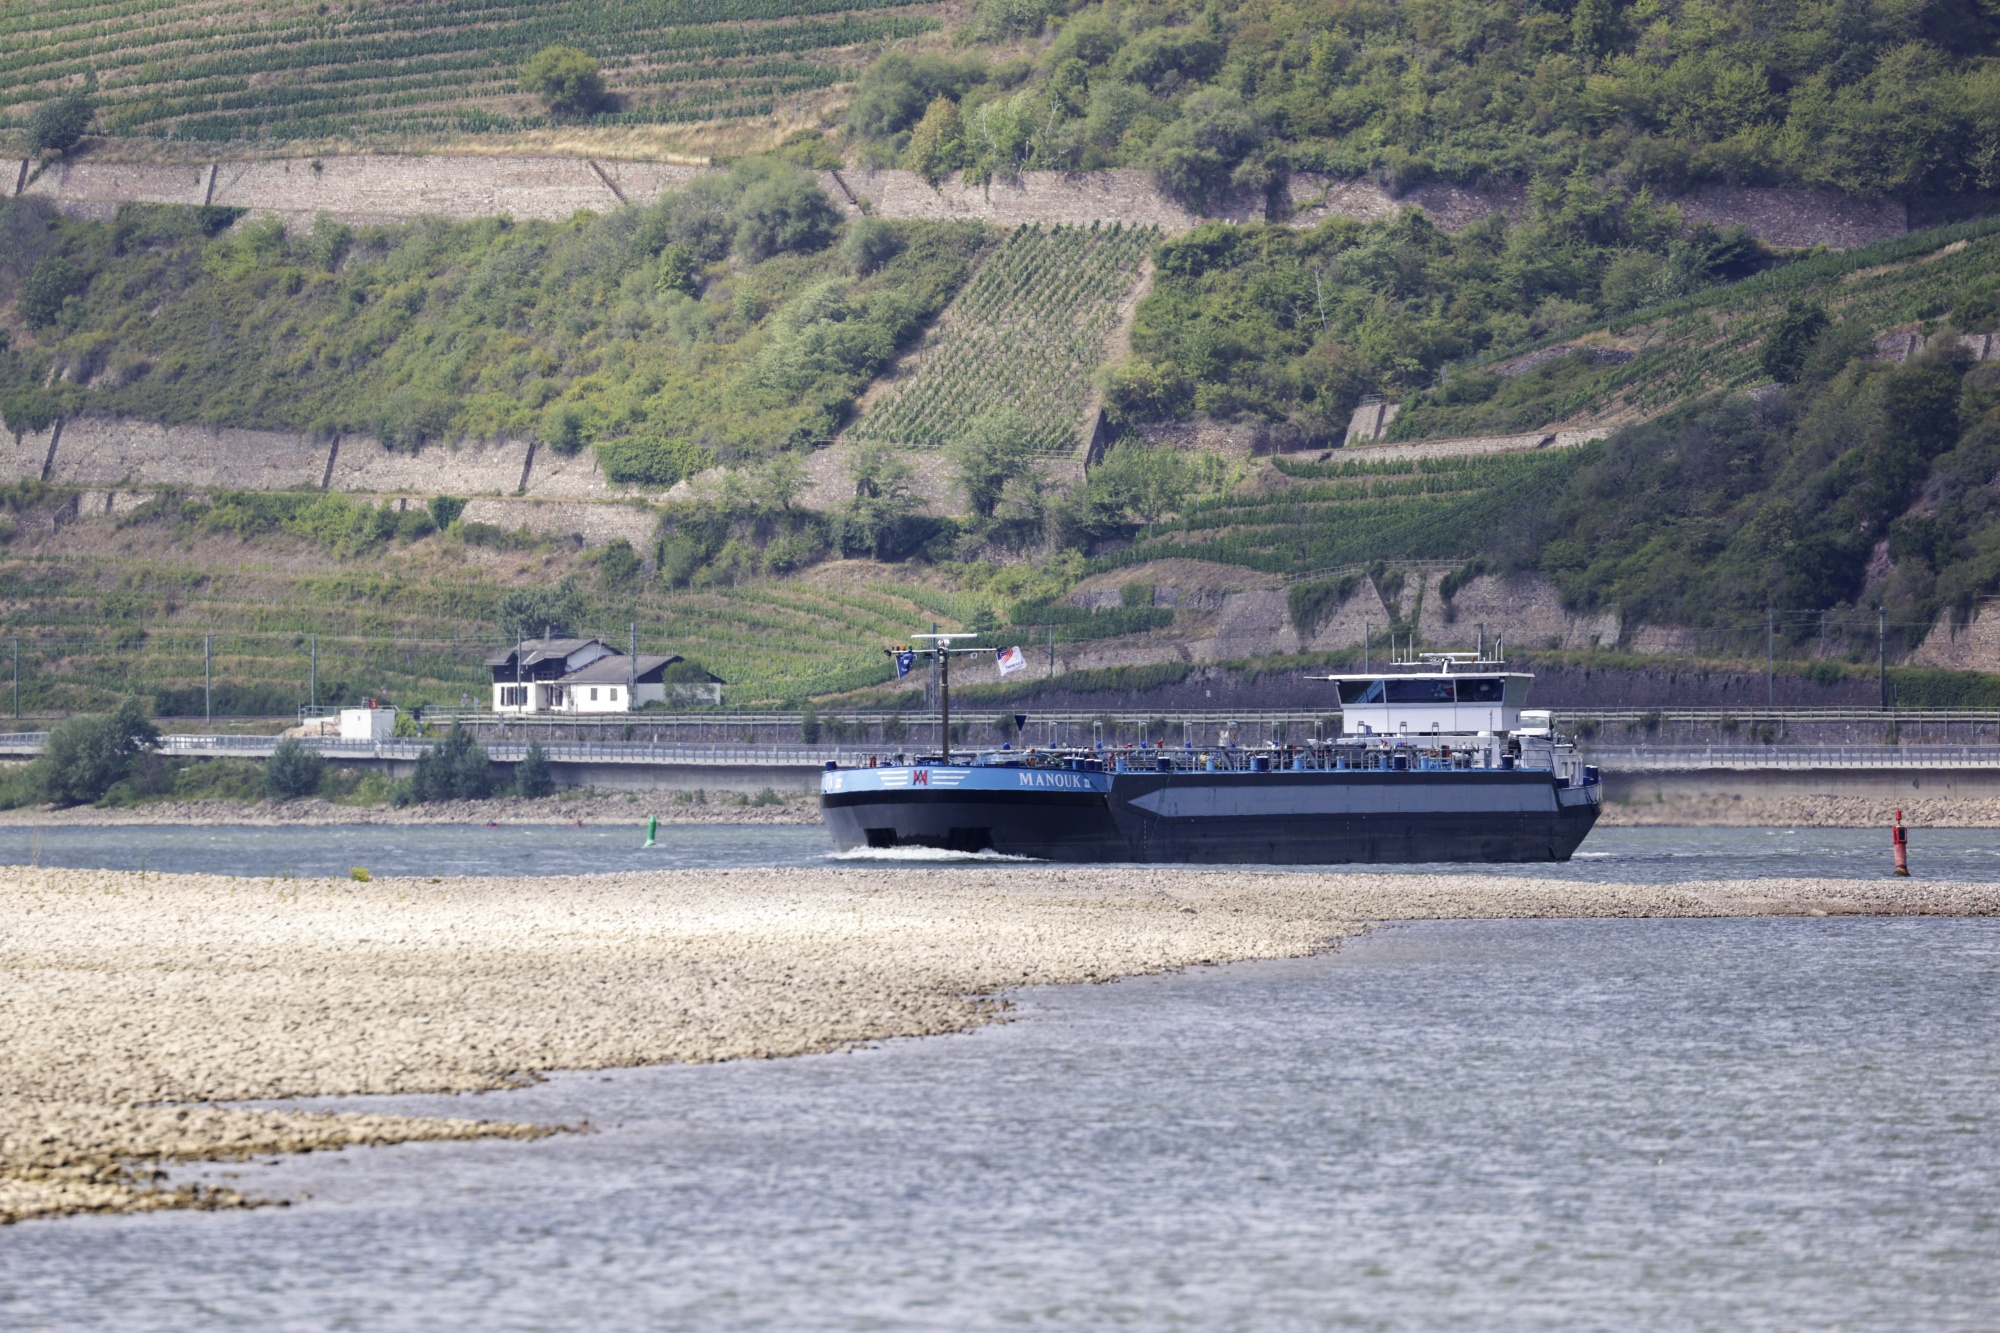 Rhine River Water Level Fall Hits Flow of Commodities Bloomberg